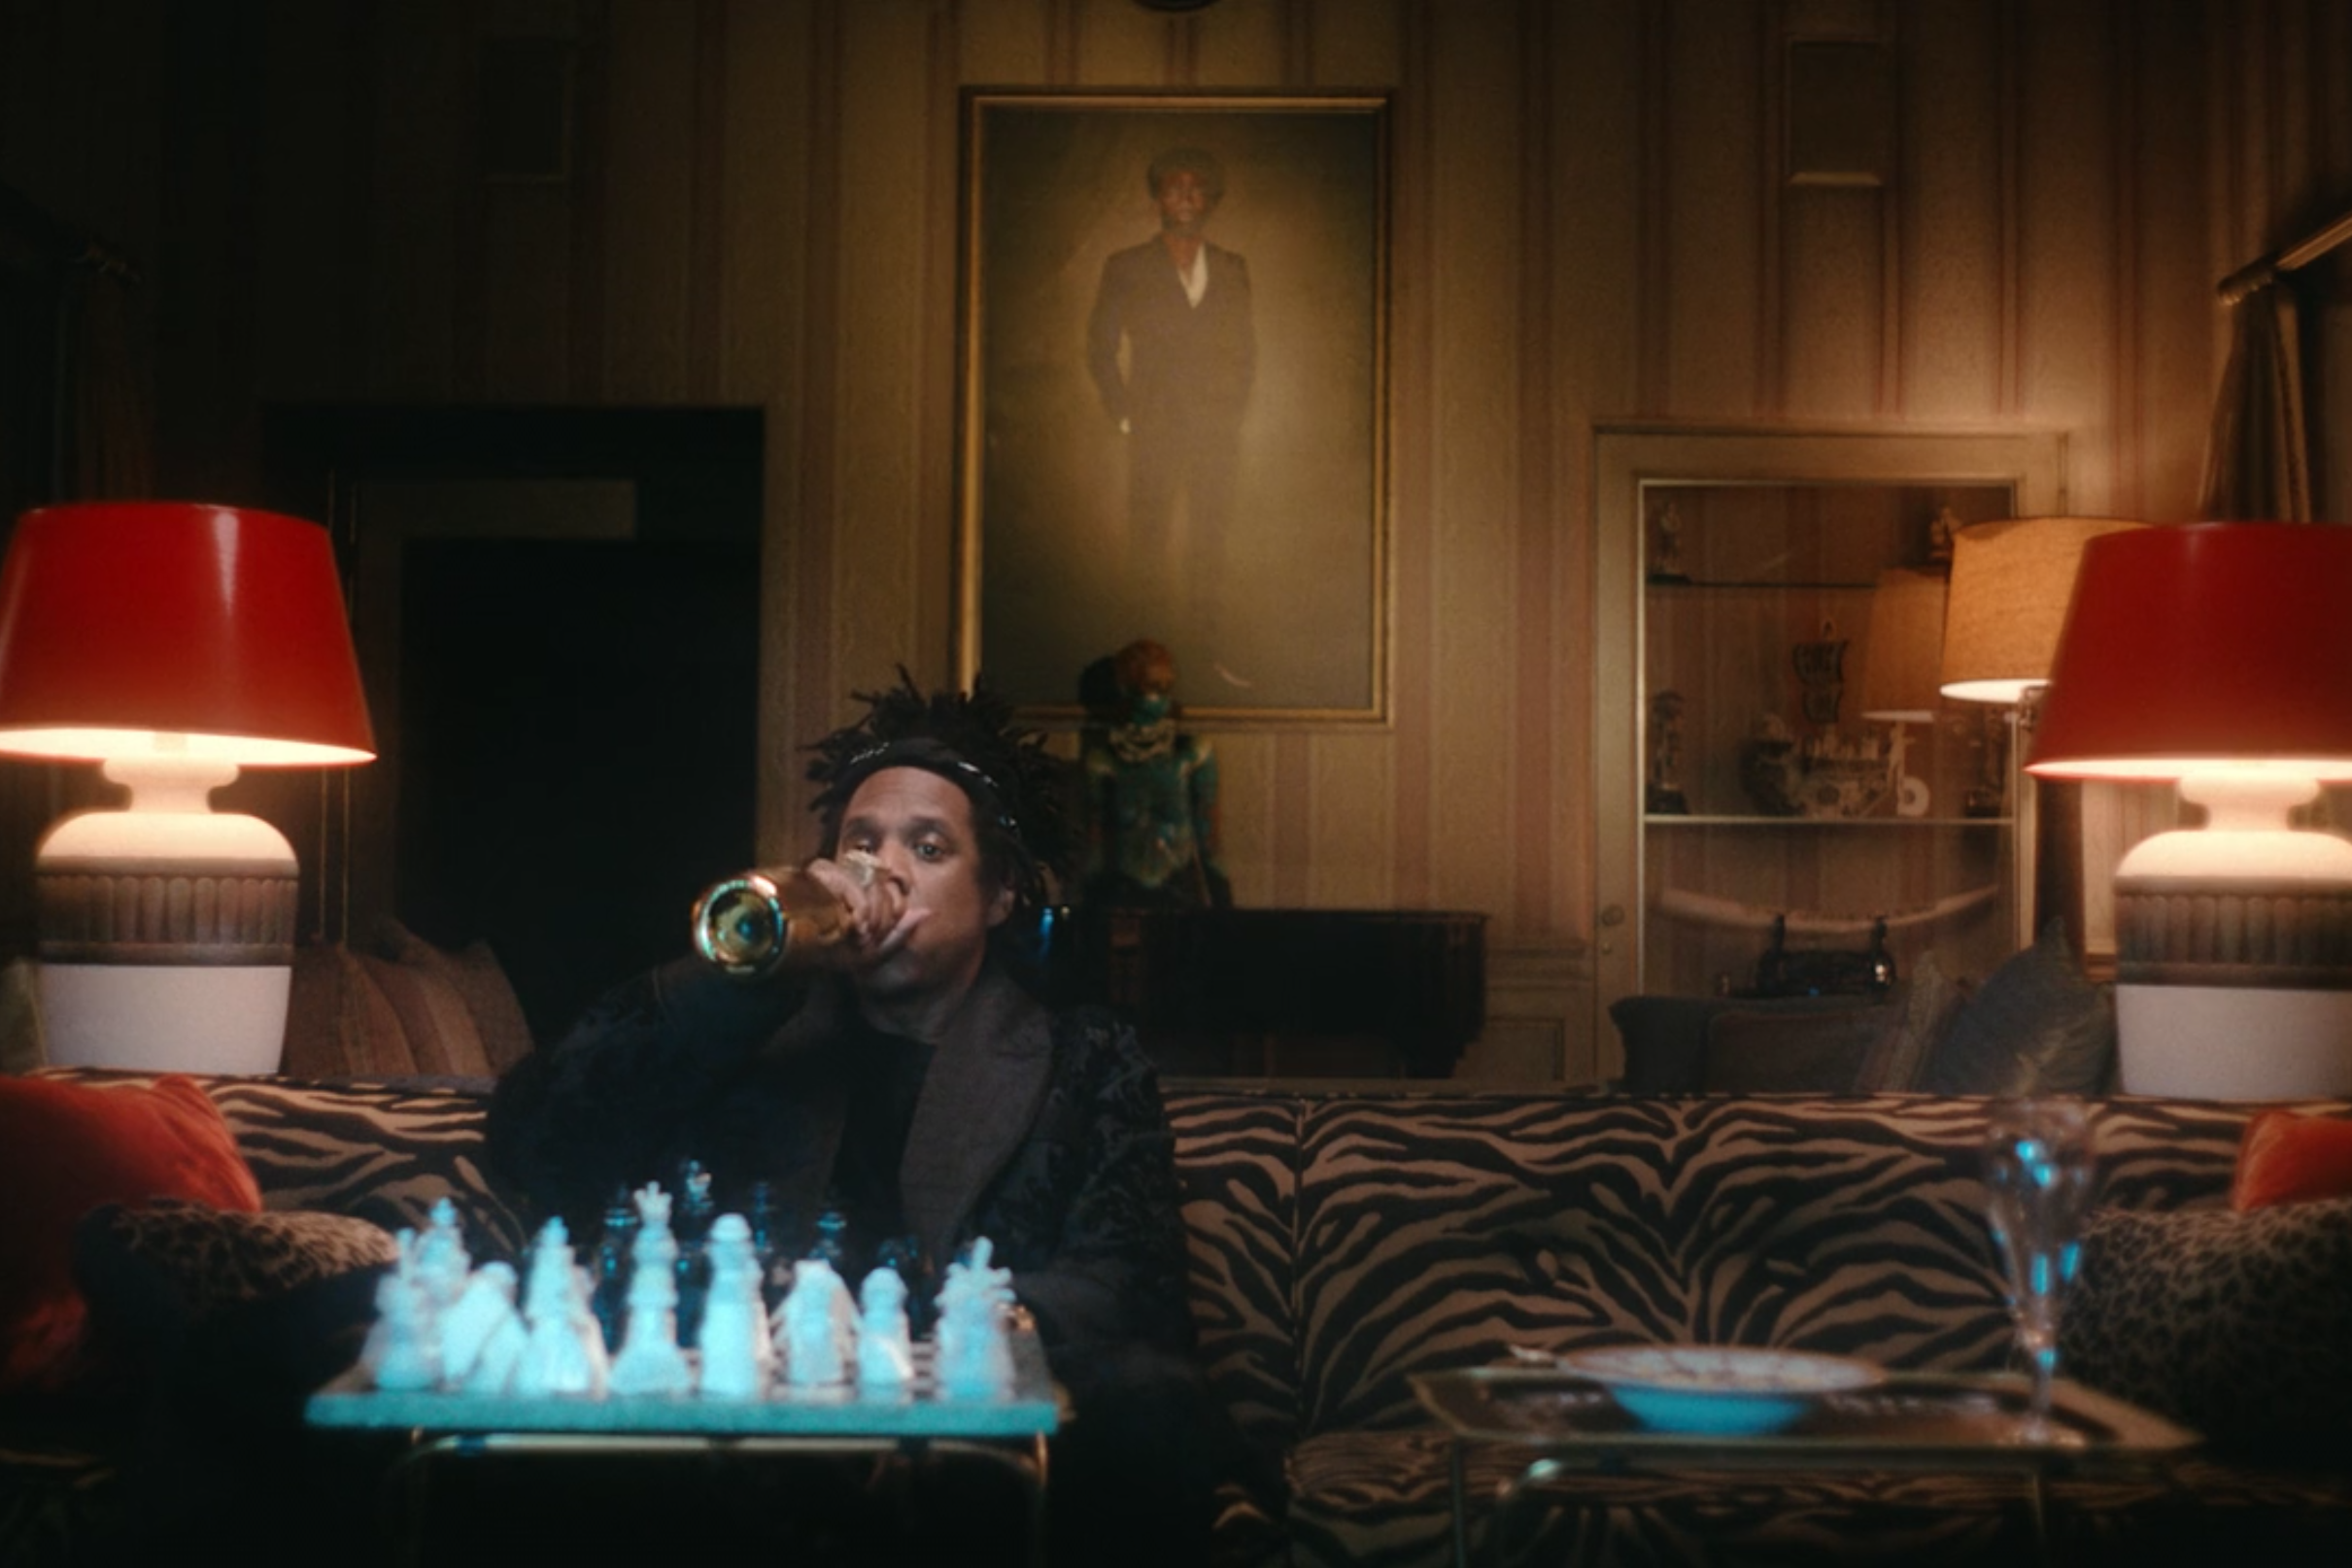 Jay-Z drinks from a gold bottle while sitting in front of a chessboard.